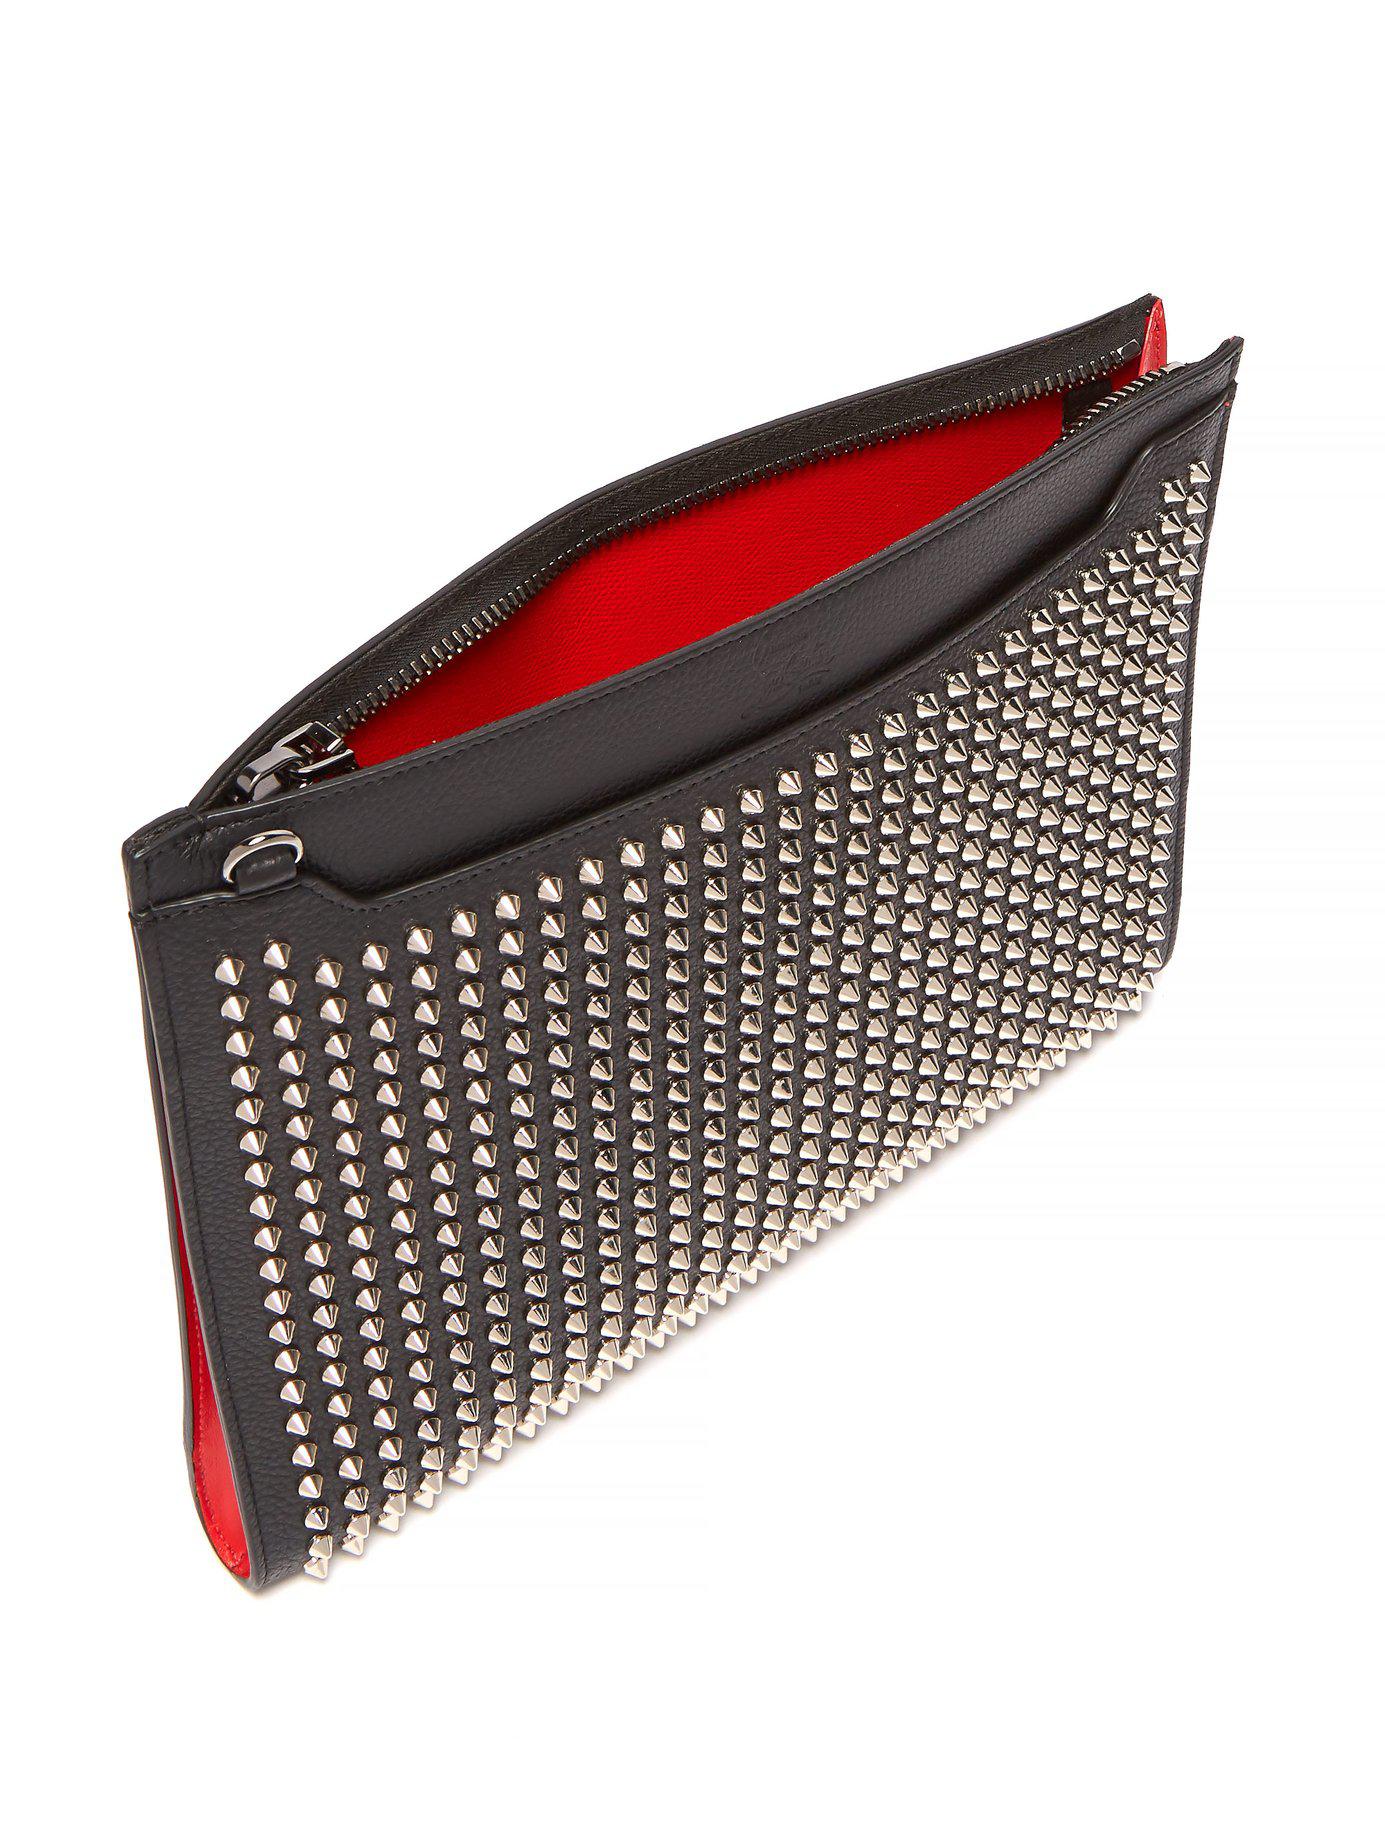 Christian Louboutin Skypouch Studded Leather Bag in Black Silver 